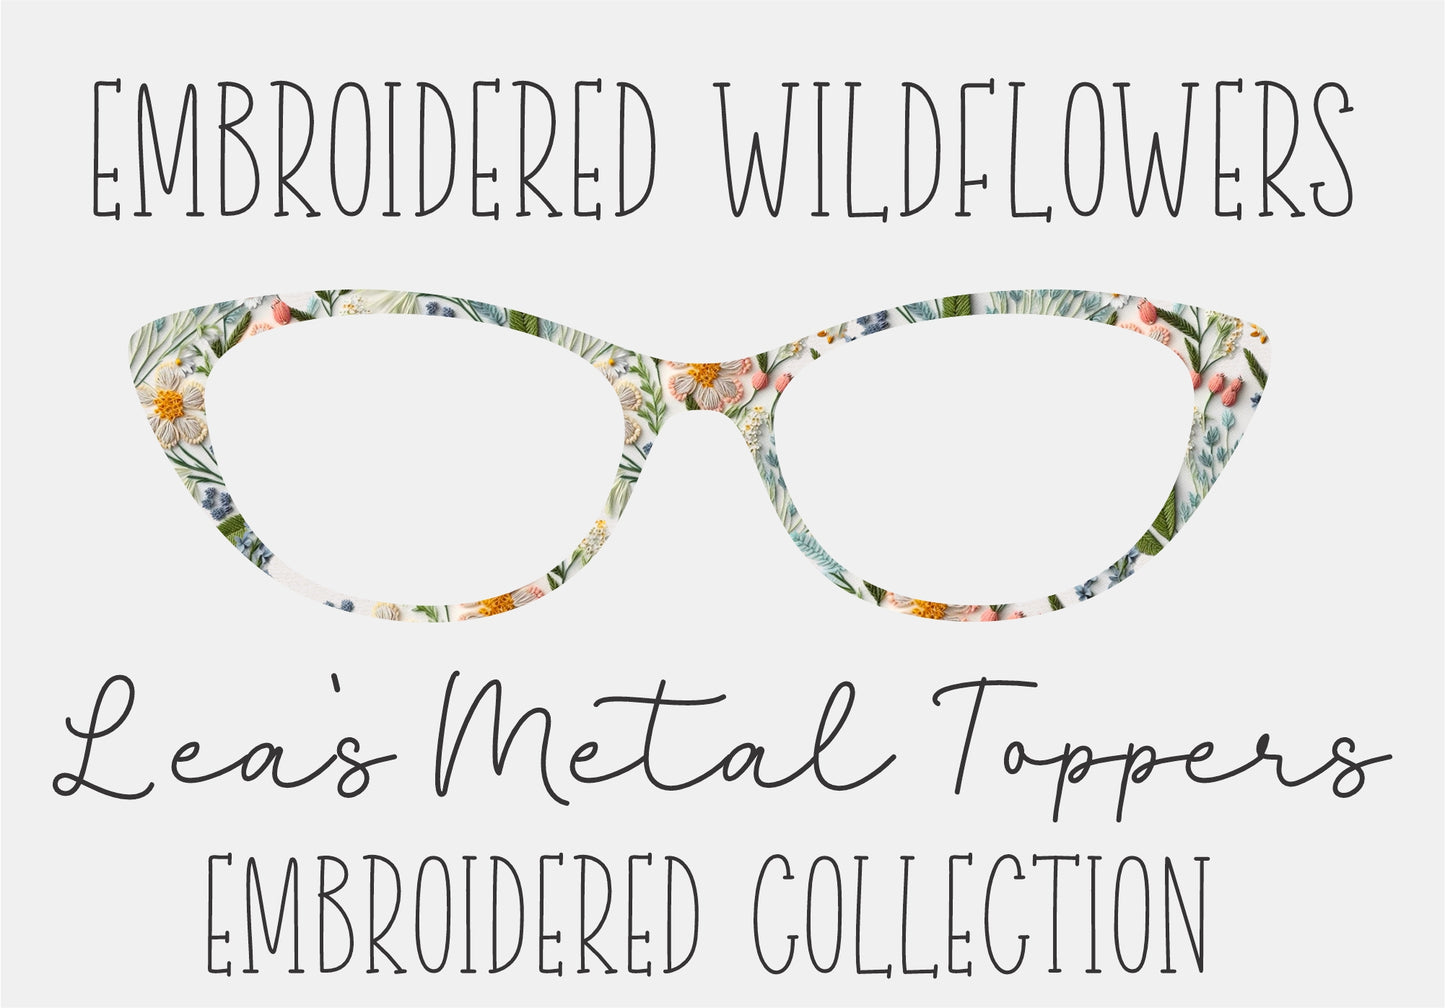 EMBROIDERED WILDFLOWERS 1 Eyewear Frame Toppers COMES WITH MAGNETS